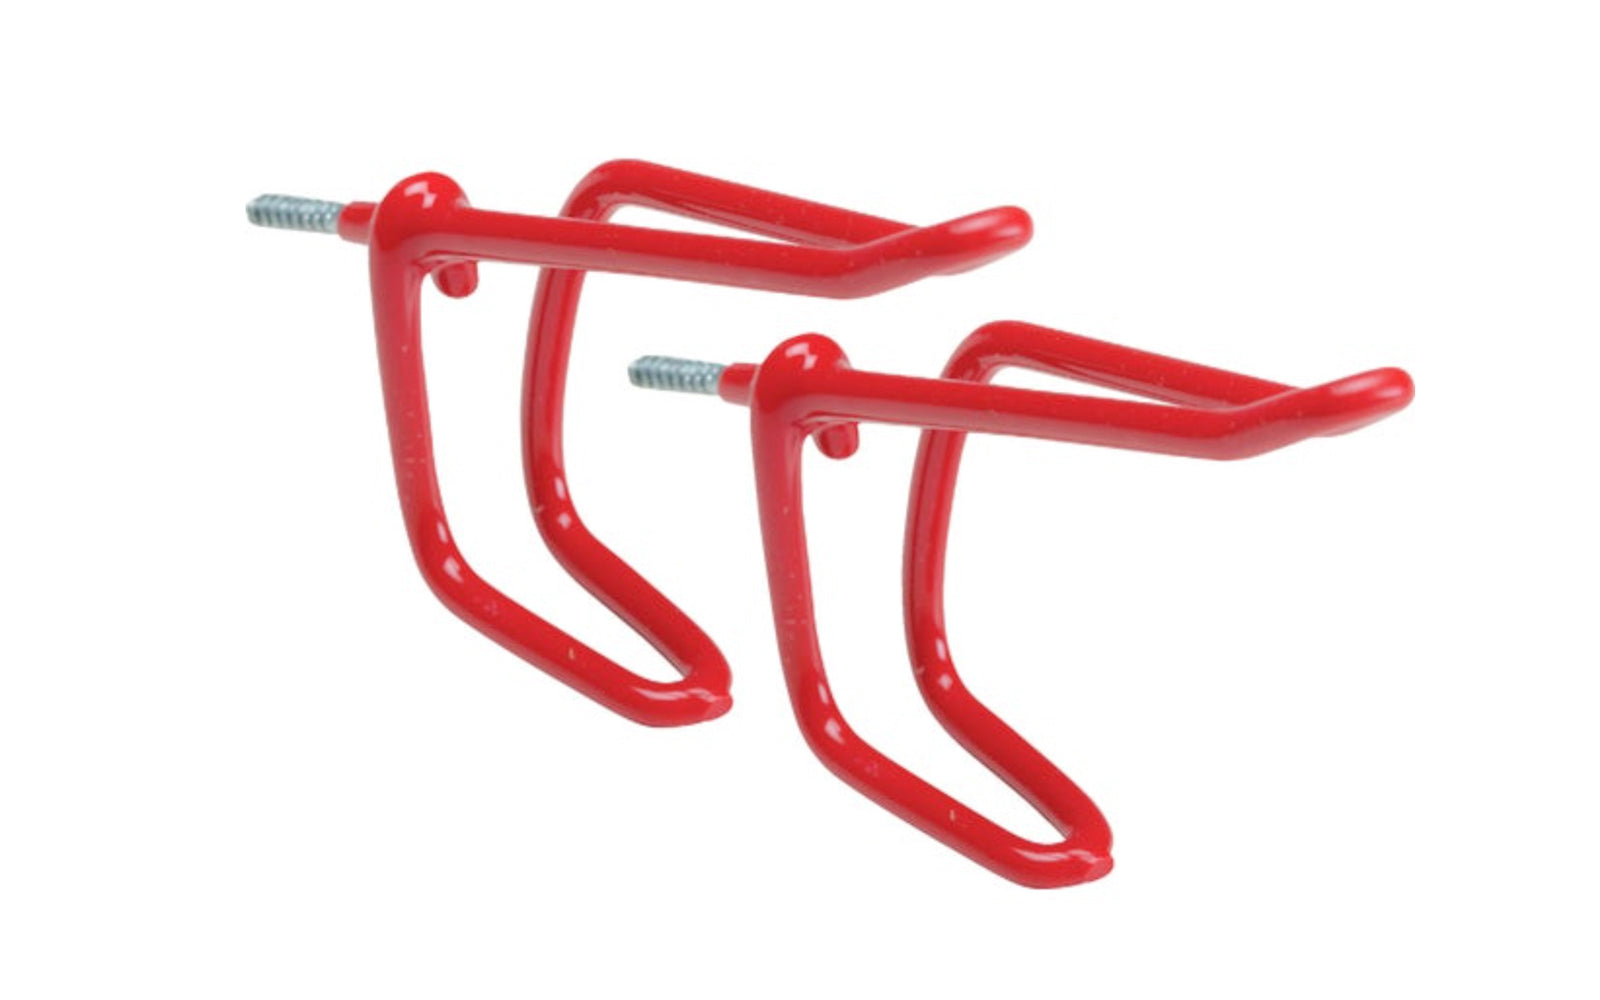 These Vinyl Coated Screw-In Coat Hooks are designed for hanging tools, clothing, housewares, etc. Red color vinyl. 5 lb. safe working load. 2-Pack. 009326208824